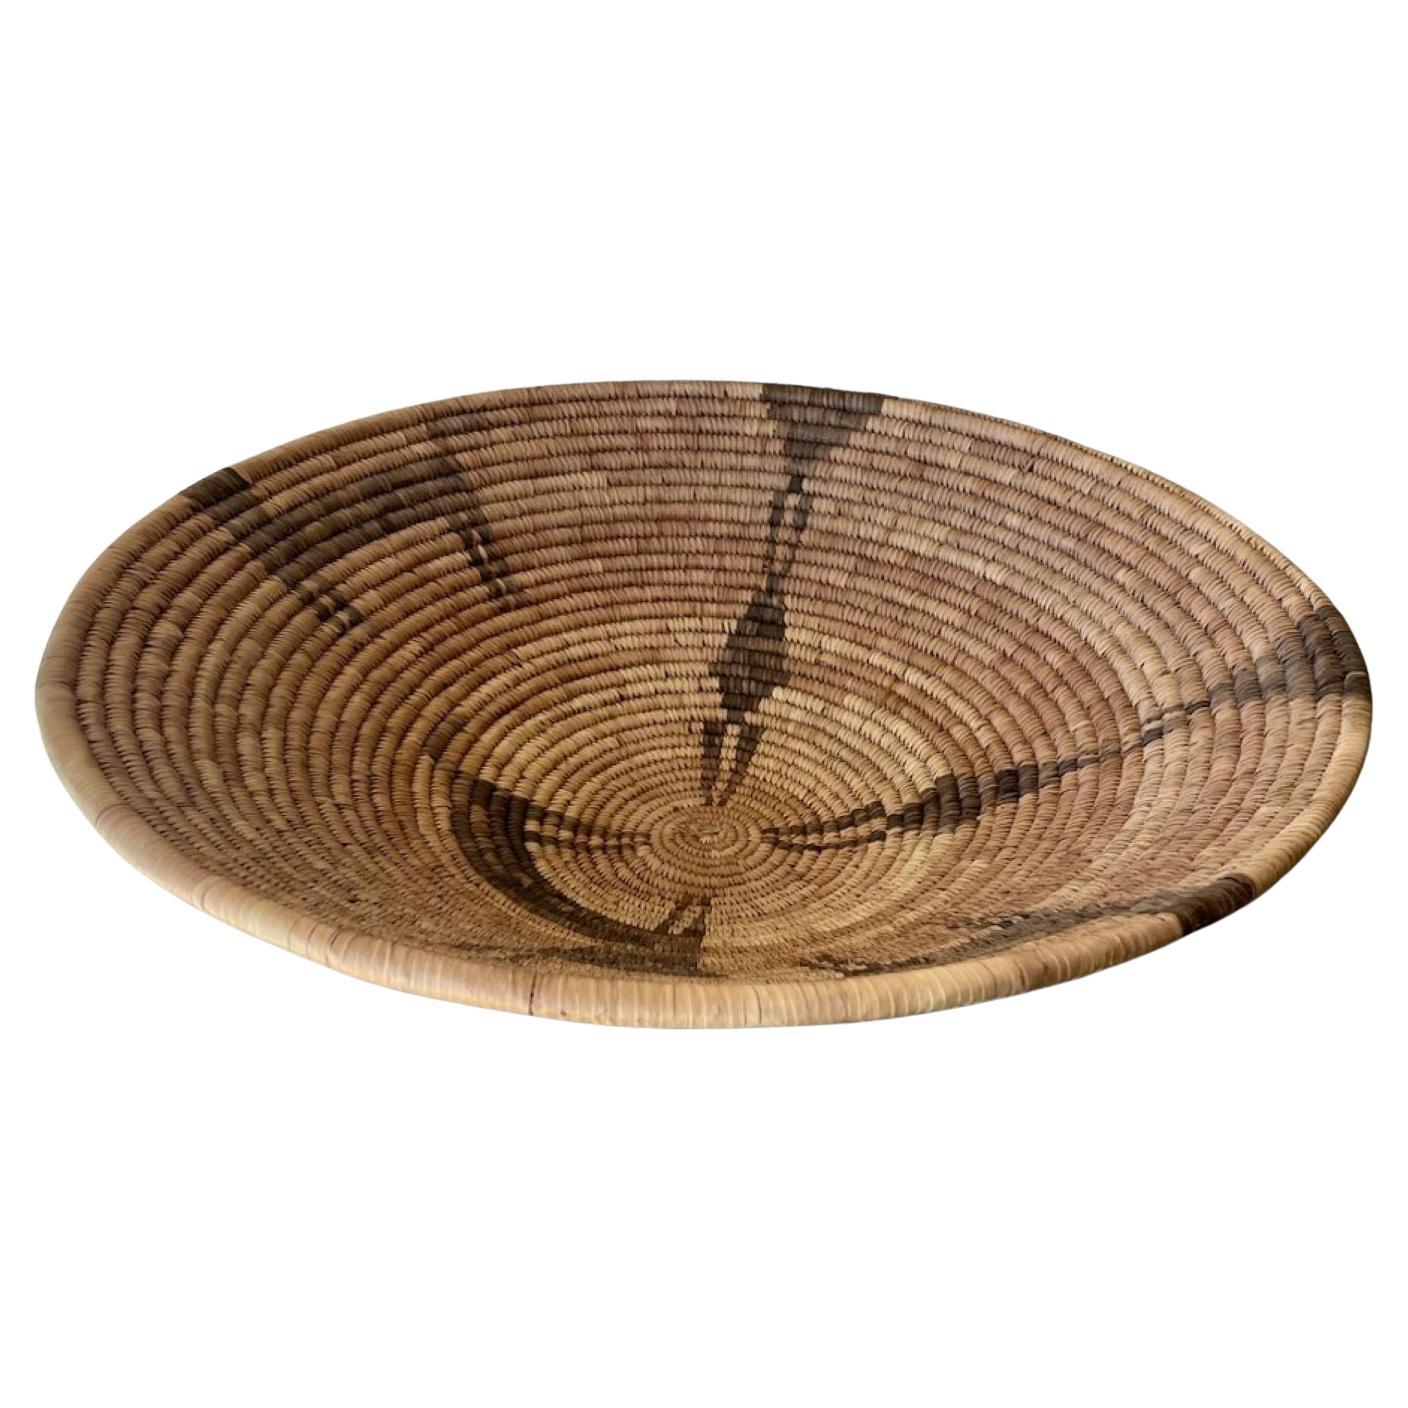 Papago Indian Woven Basket with Pictorial Motif For Sale